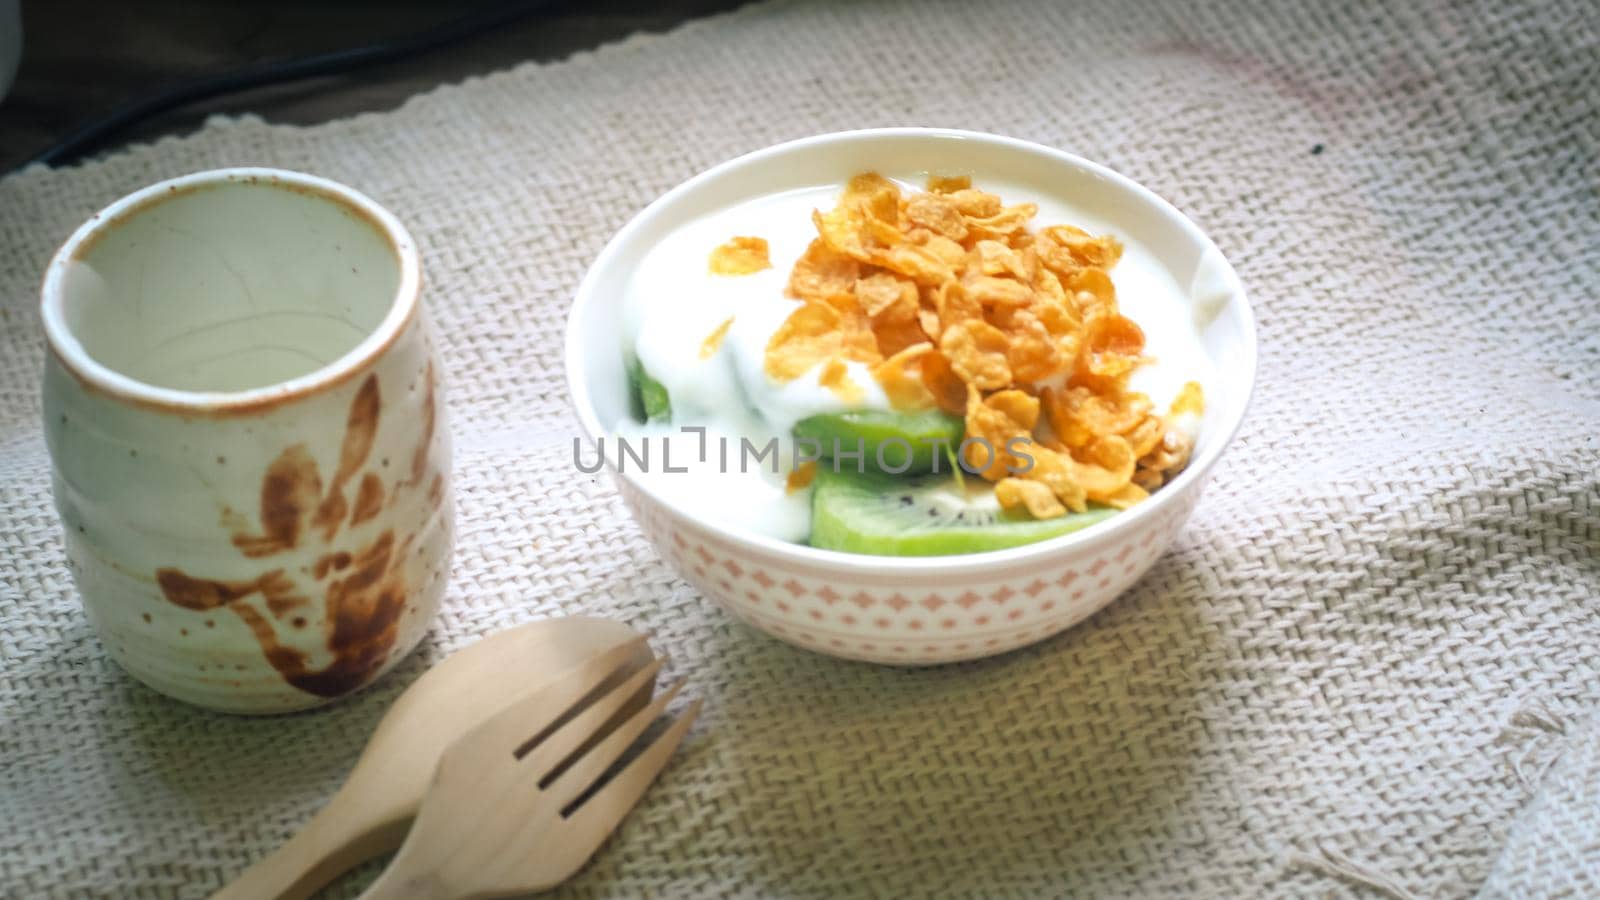 Corn flakes, cereal and milk splash in bowl . Natural homemade plain organic yogurt in wood bowl on wood texture background by Petrichor